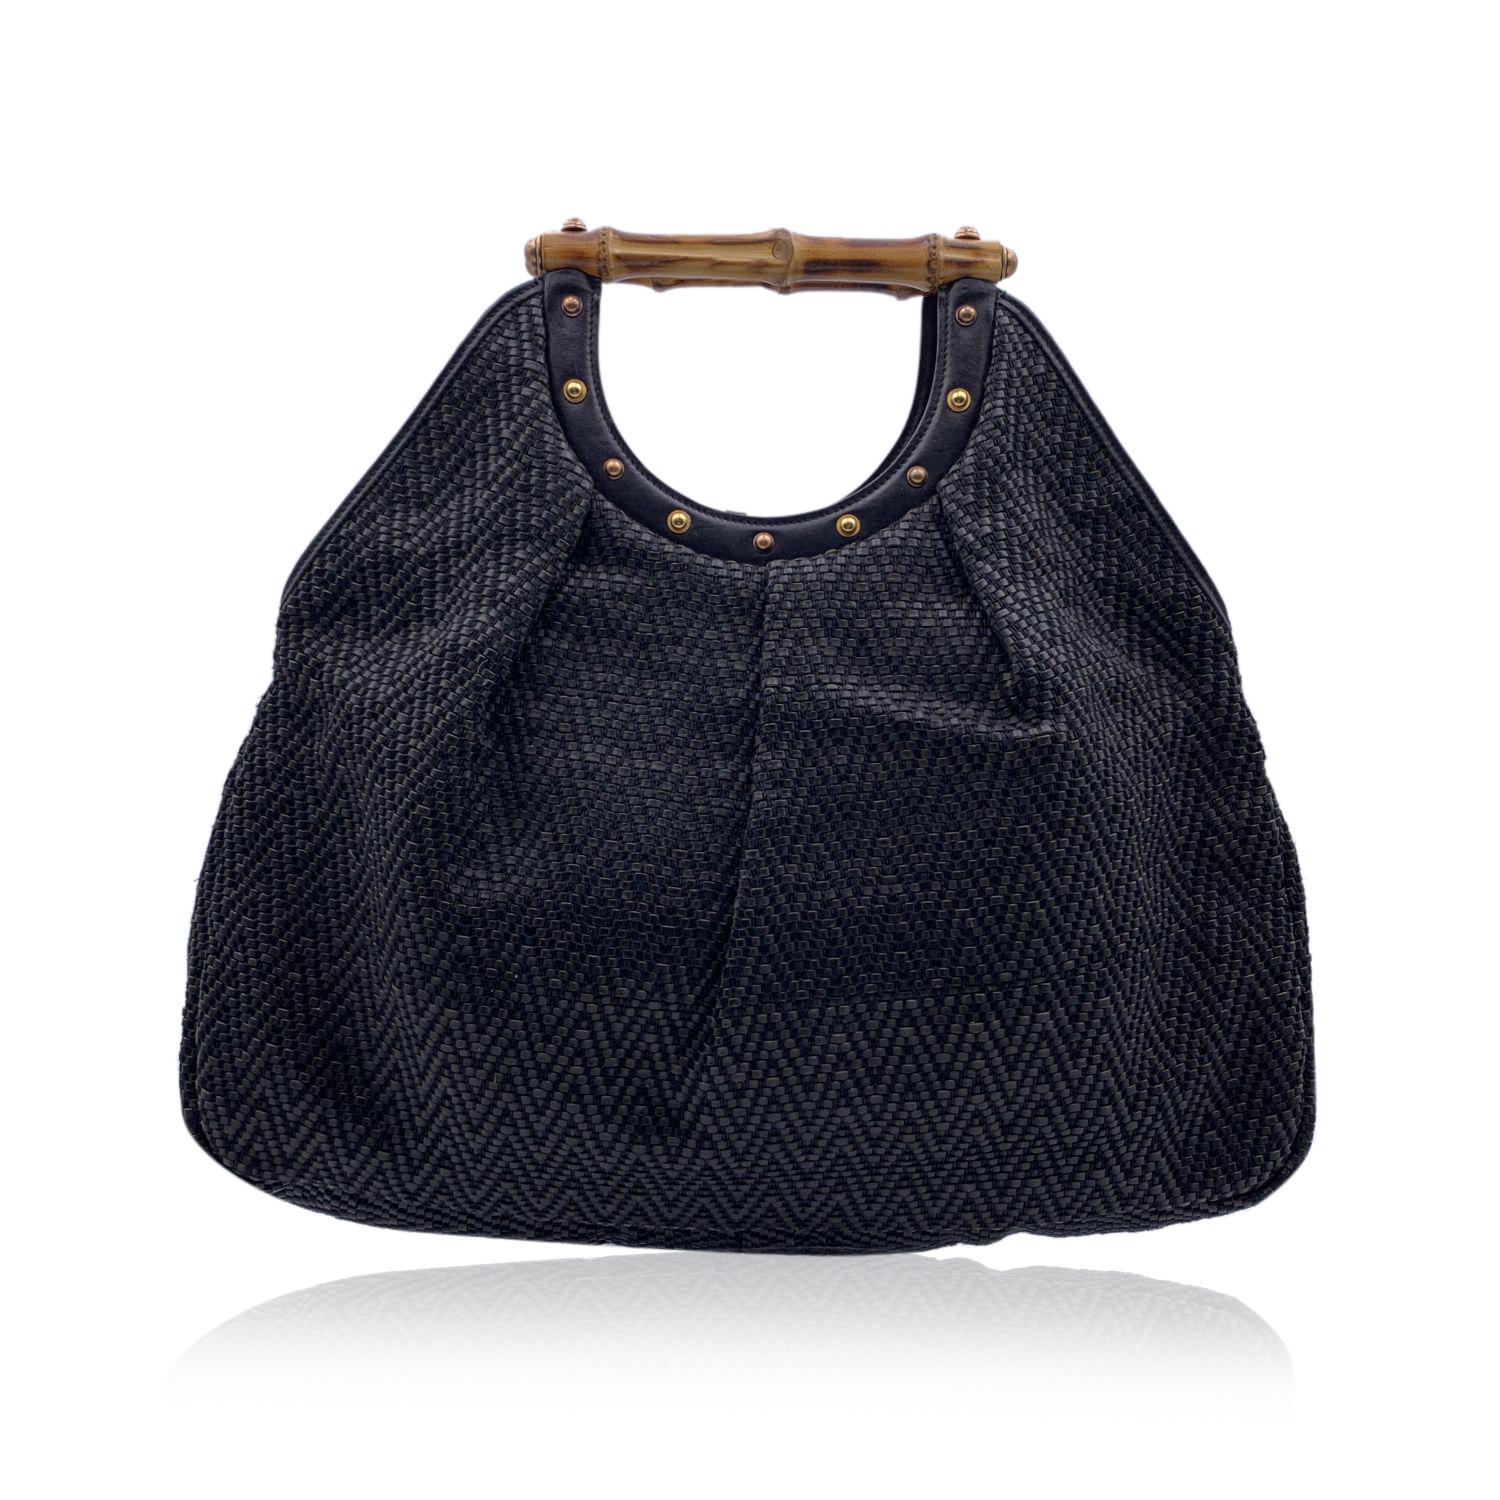 Gucci Black Woven Leather Bamboo Studded Tote Bag Handbag In Excellent Condition In Rome, Rome